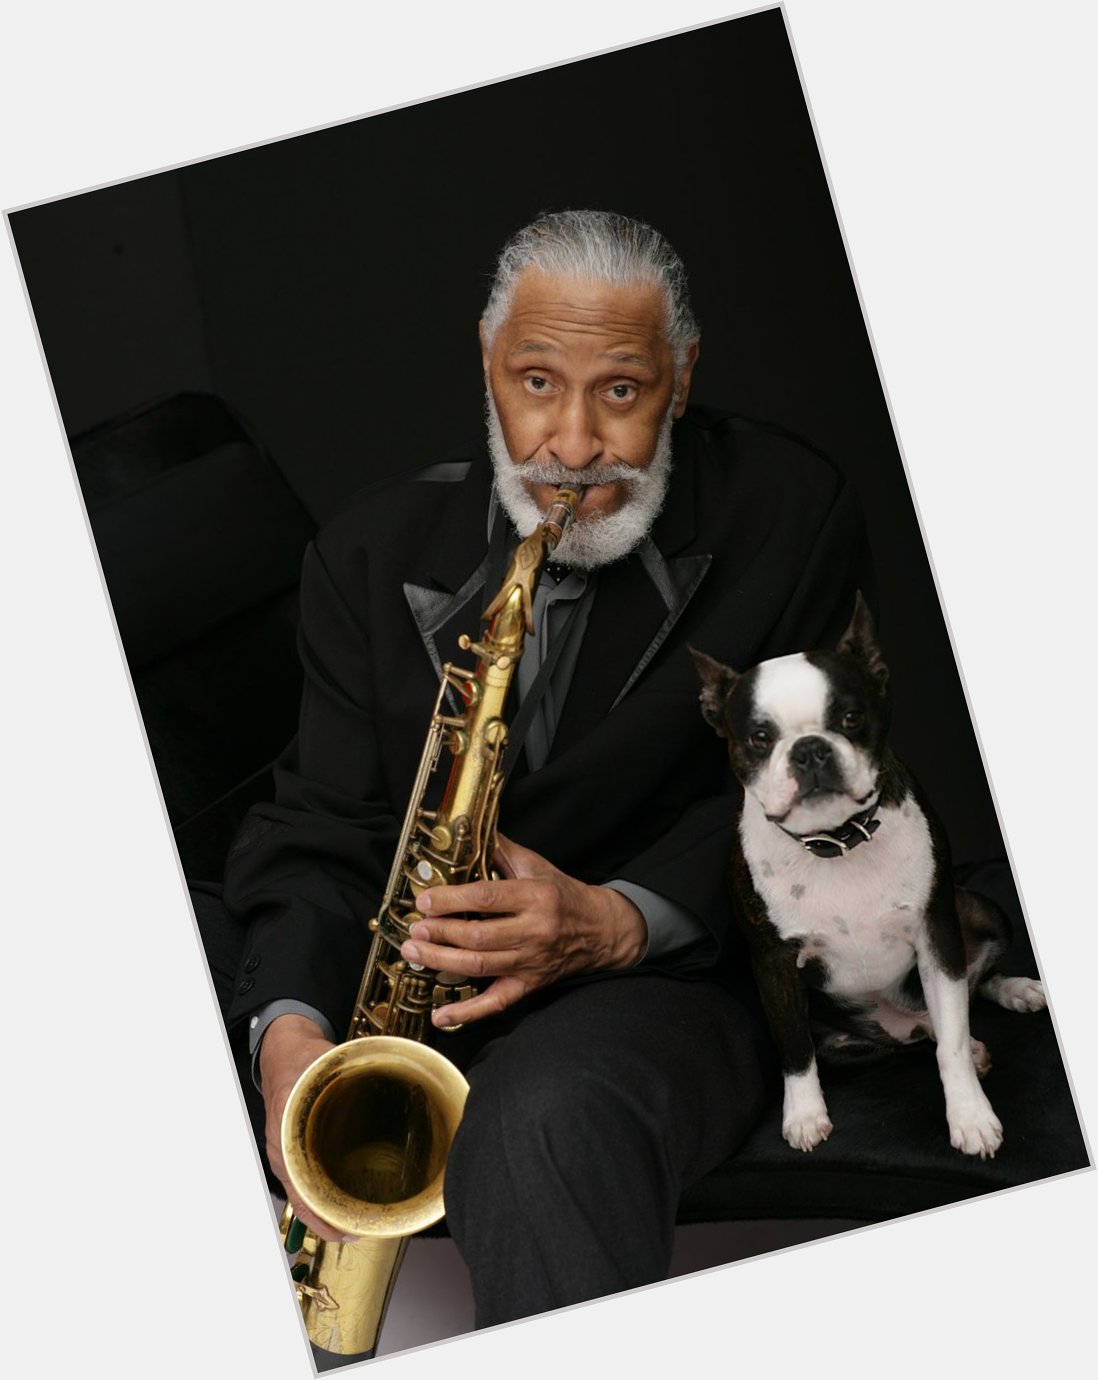 Happy 92nd birthday to the saxophone colossus Sonny Rollins born 